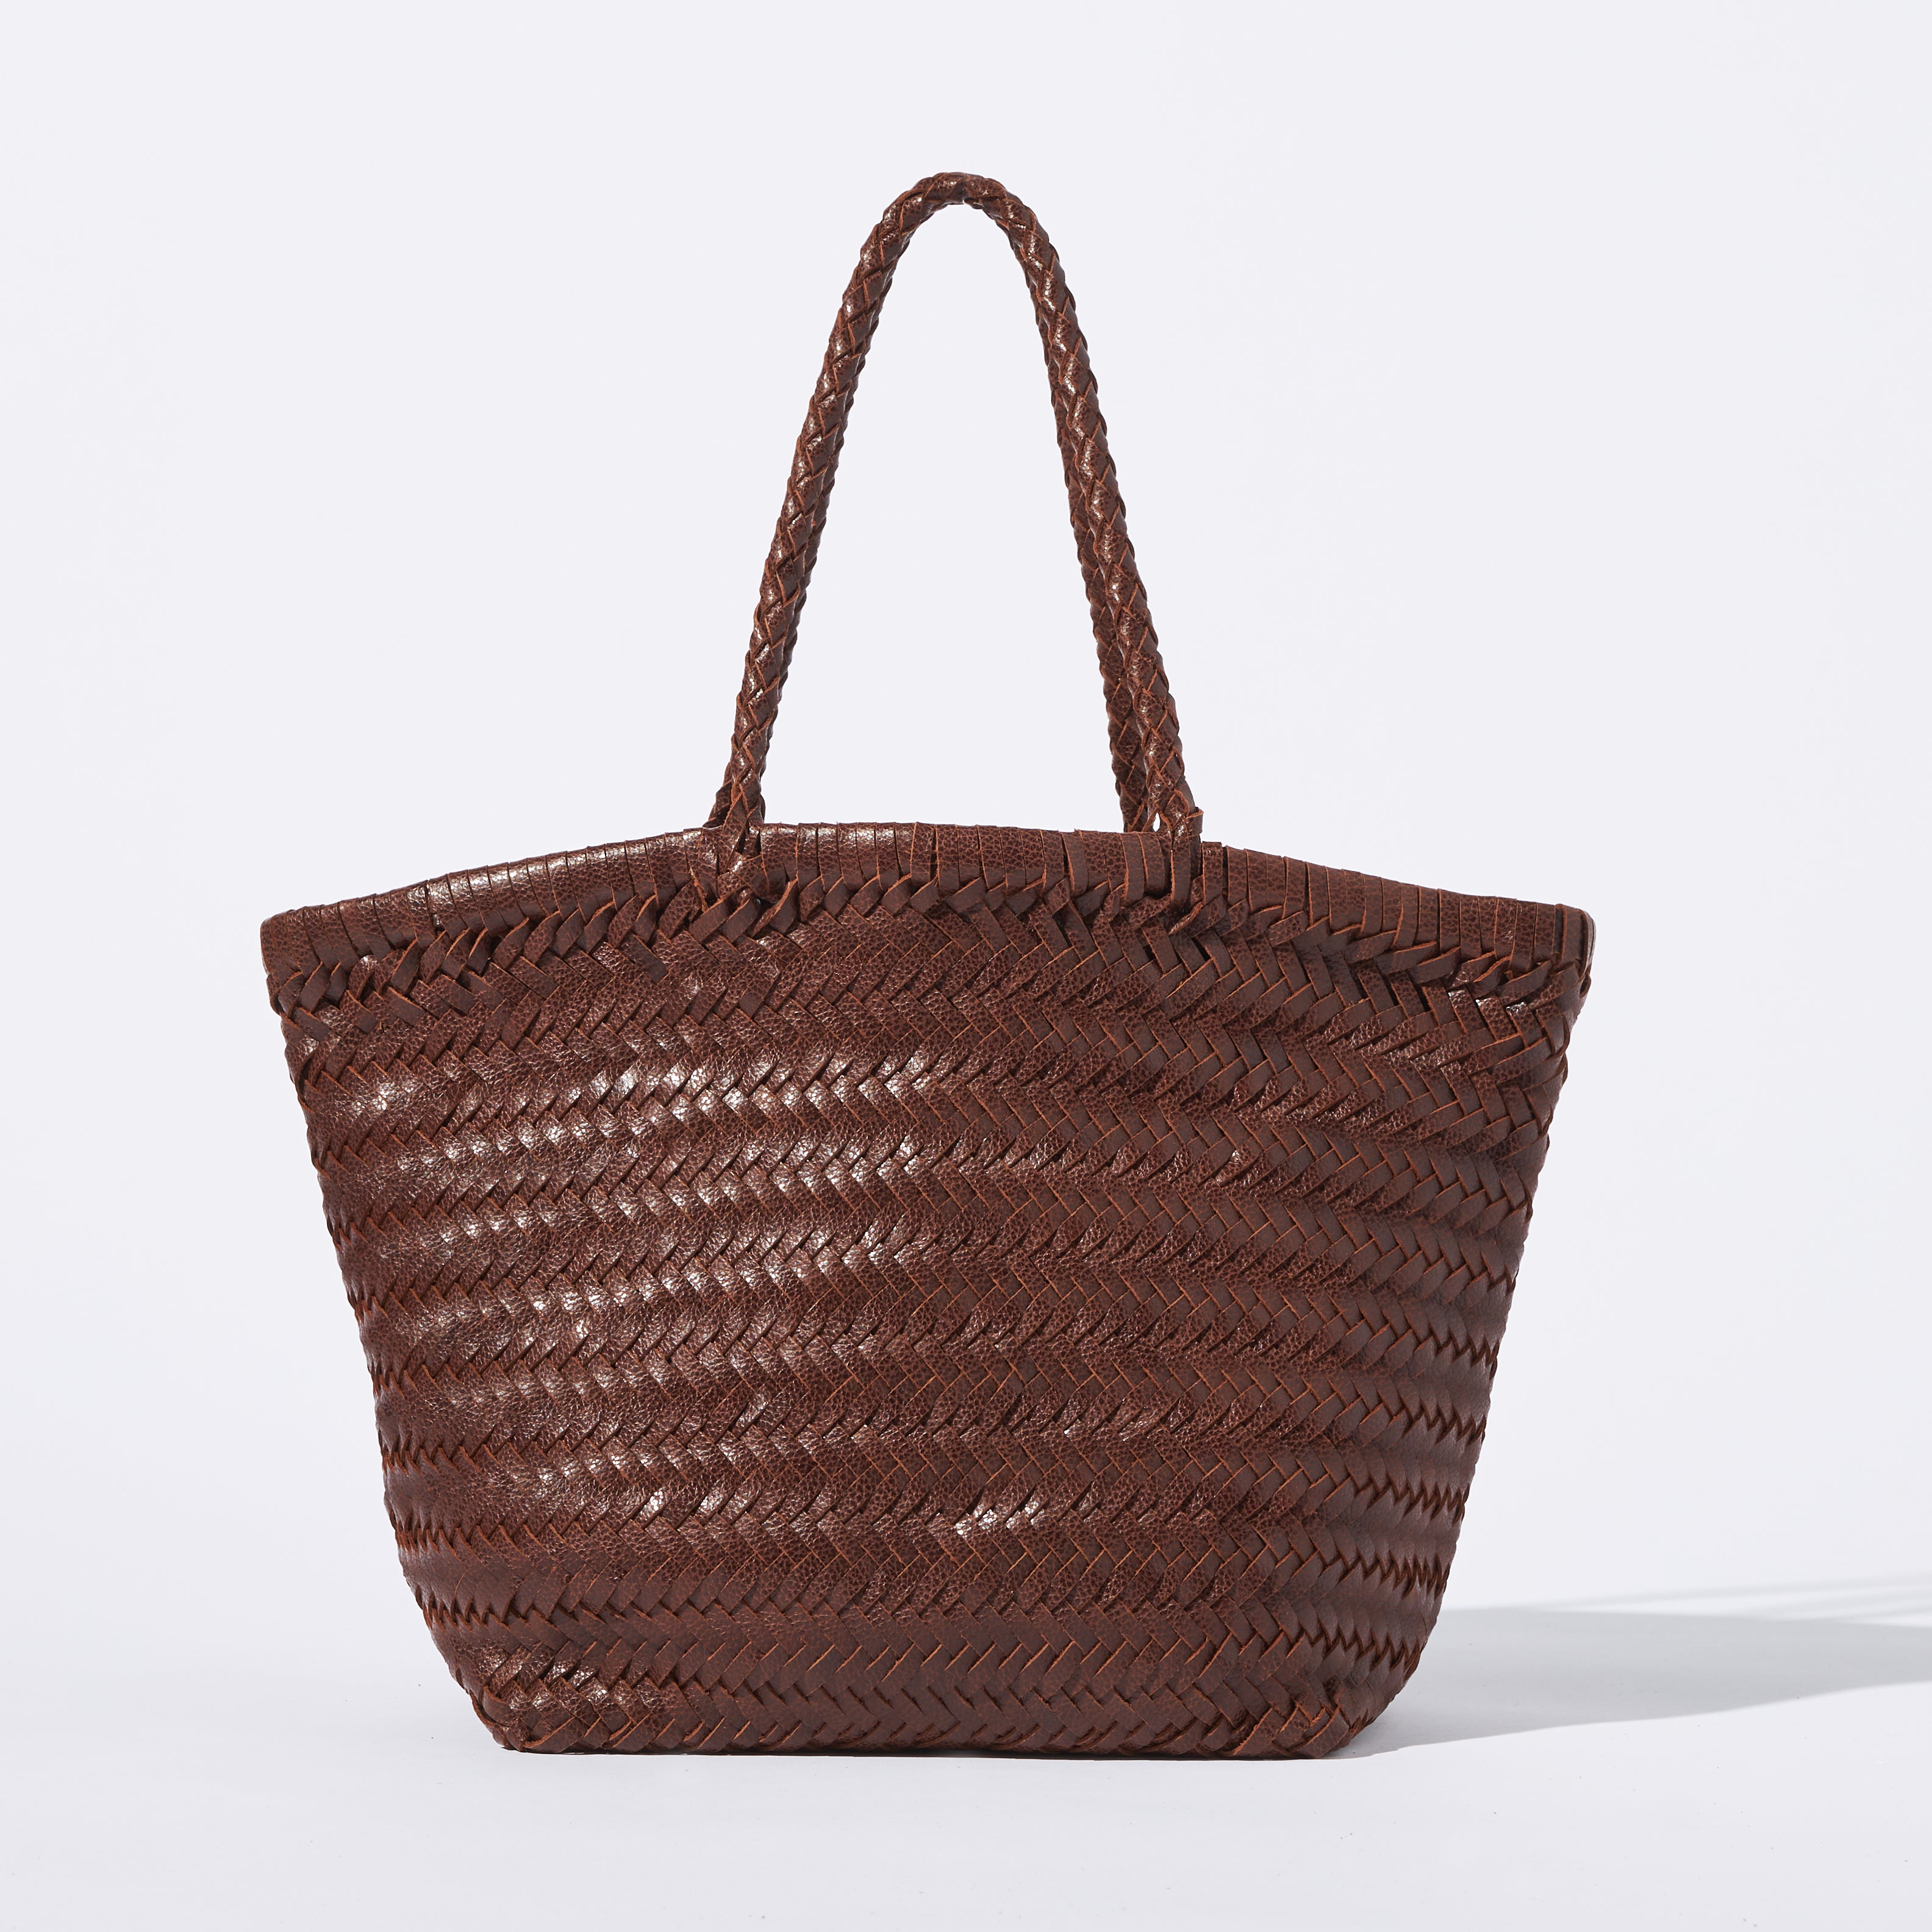 Small Woven Real Leather Drawstring Basket Bag Tote Bucket Beach